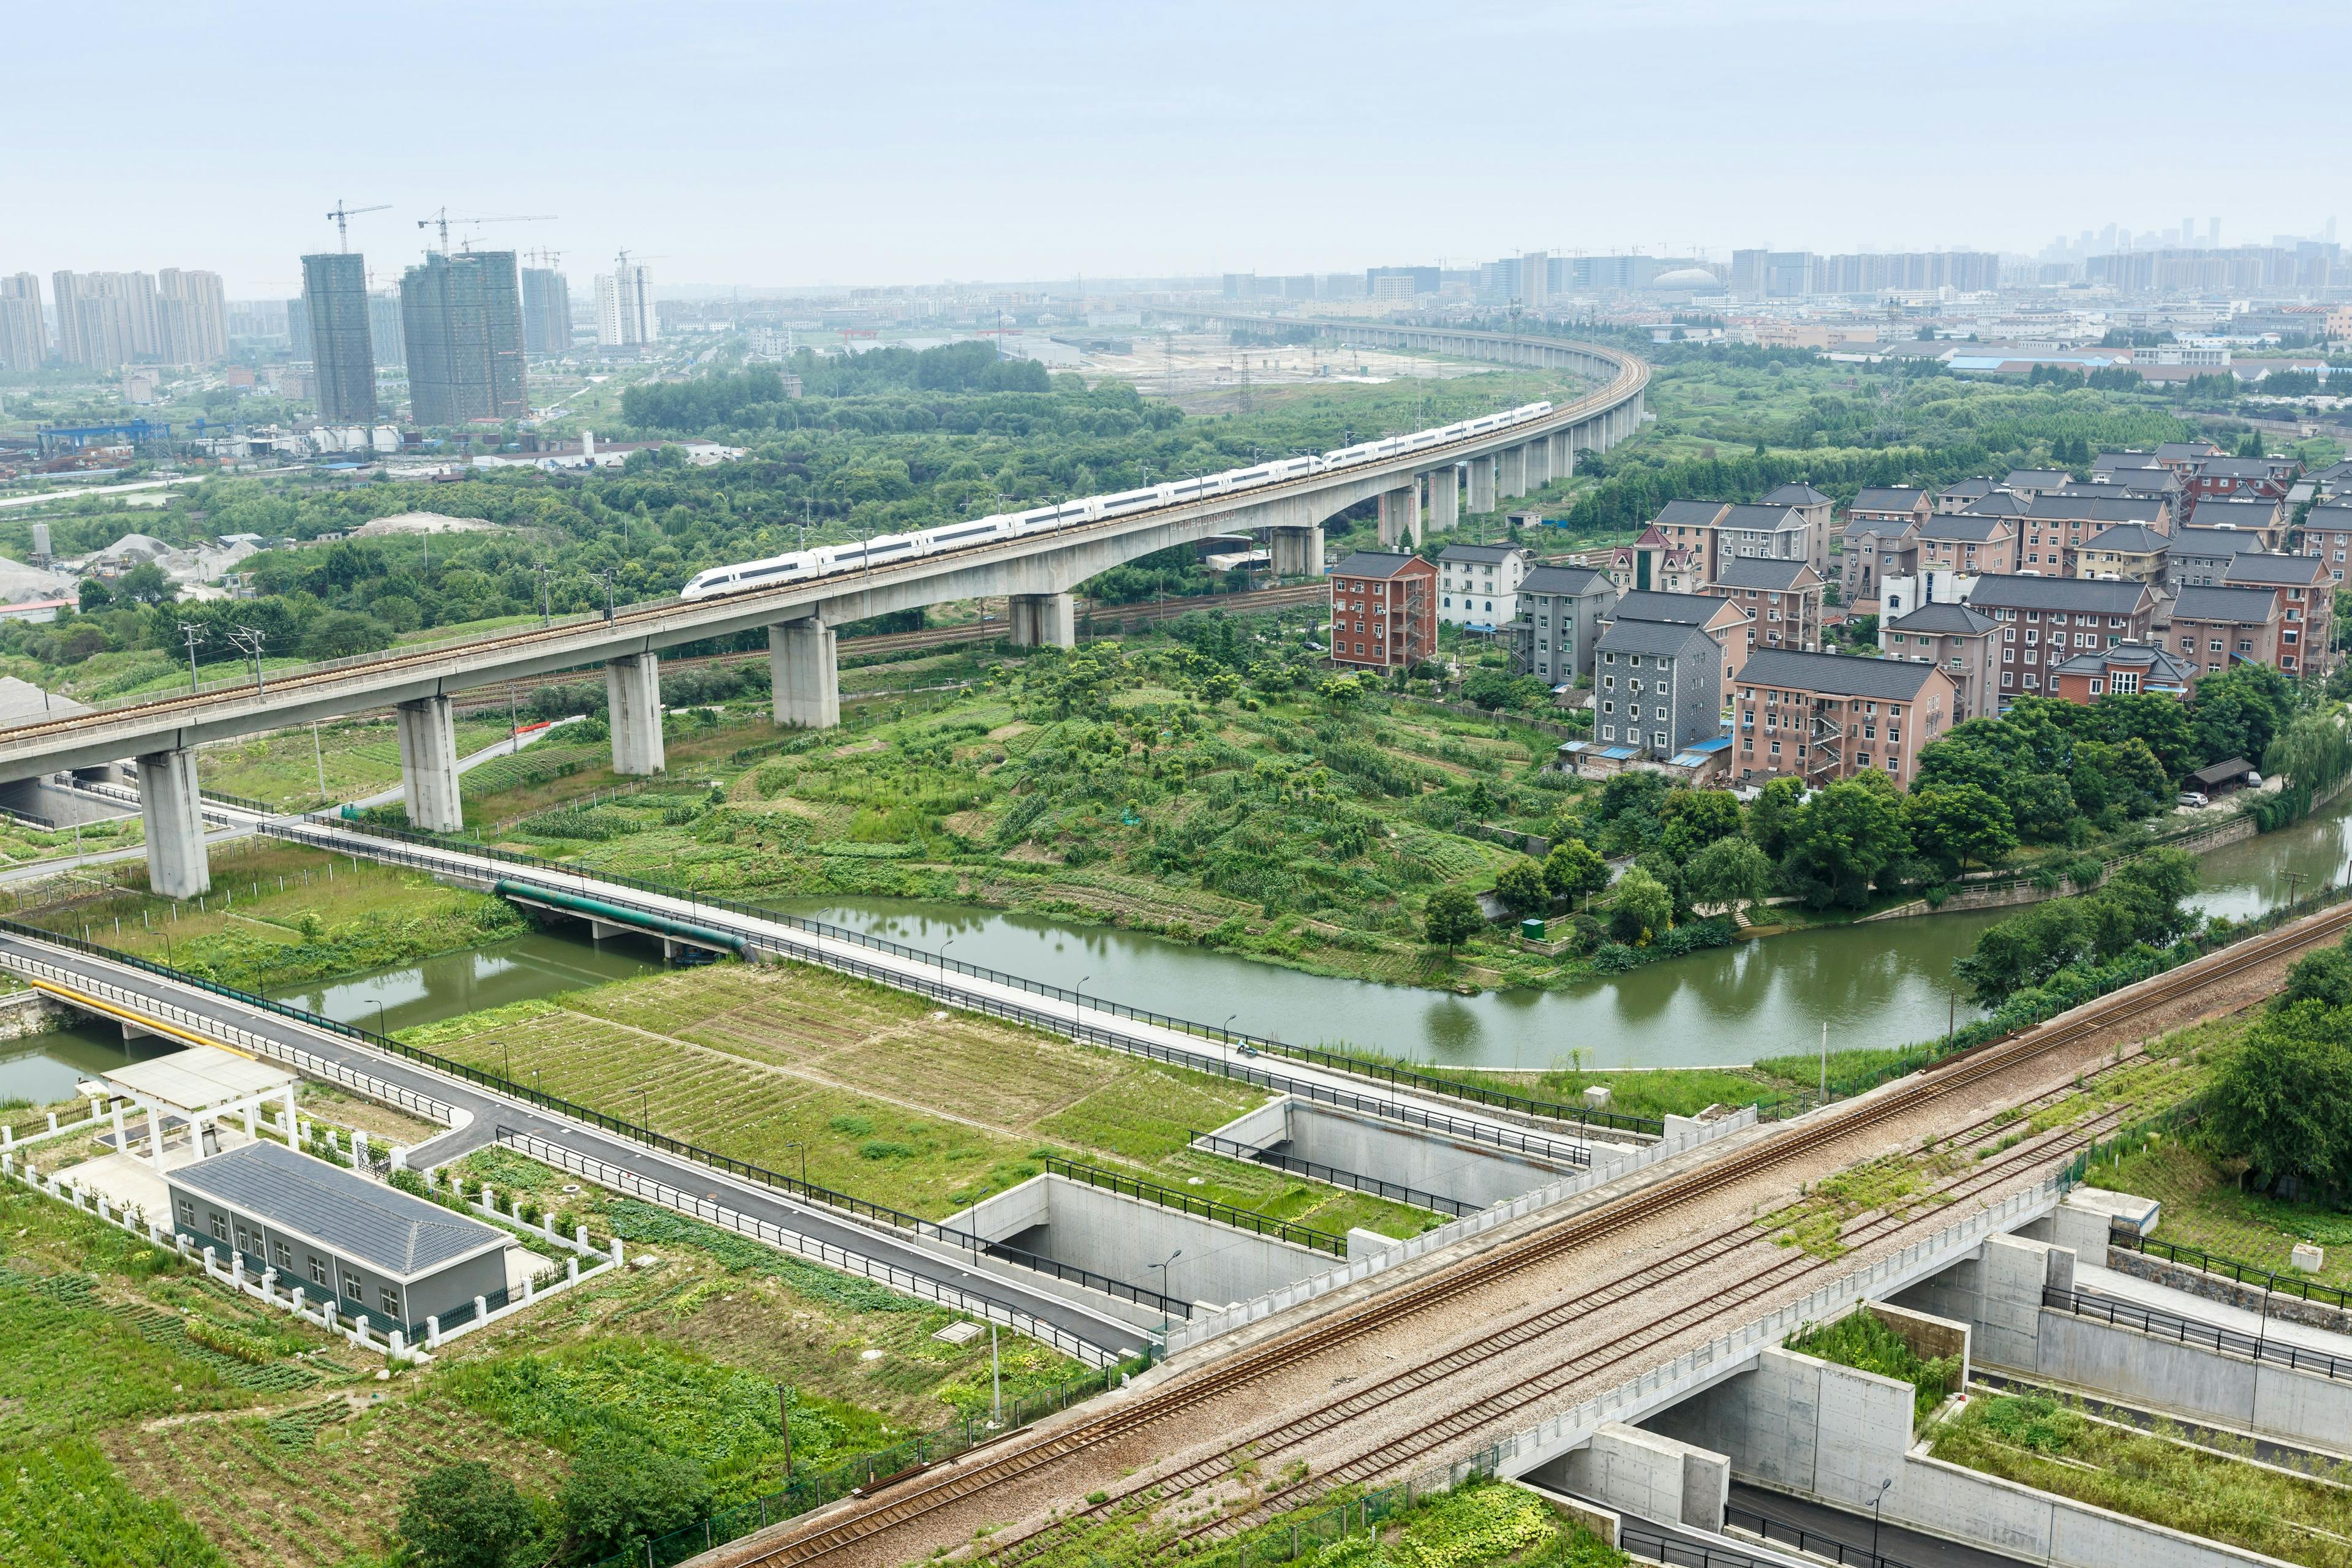 Hangzhou suburbs aerial view in China | Image Credit: © ABCDstock - stock.adobe.com